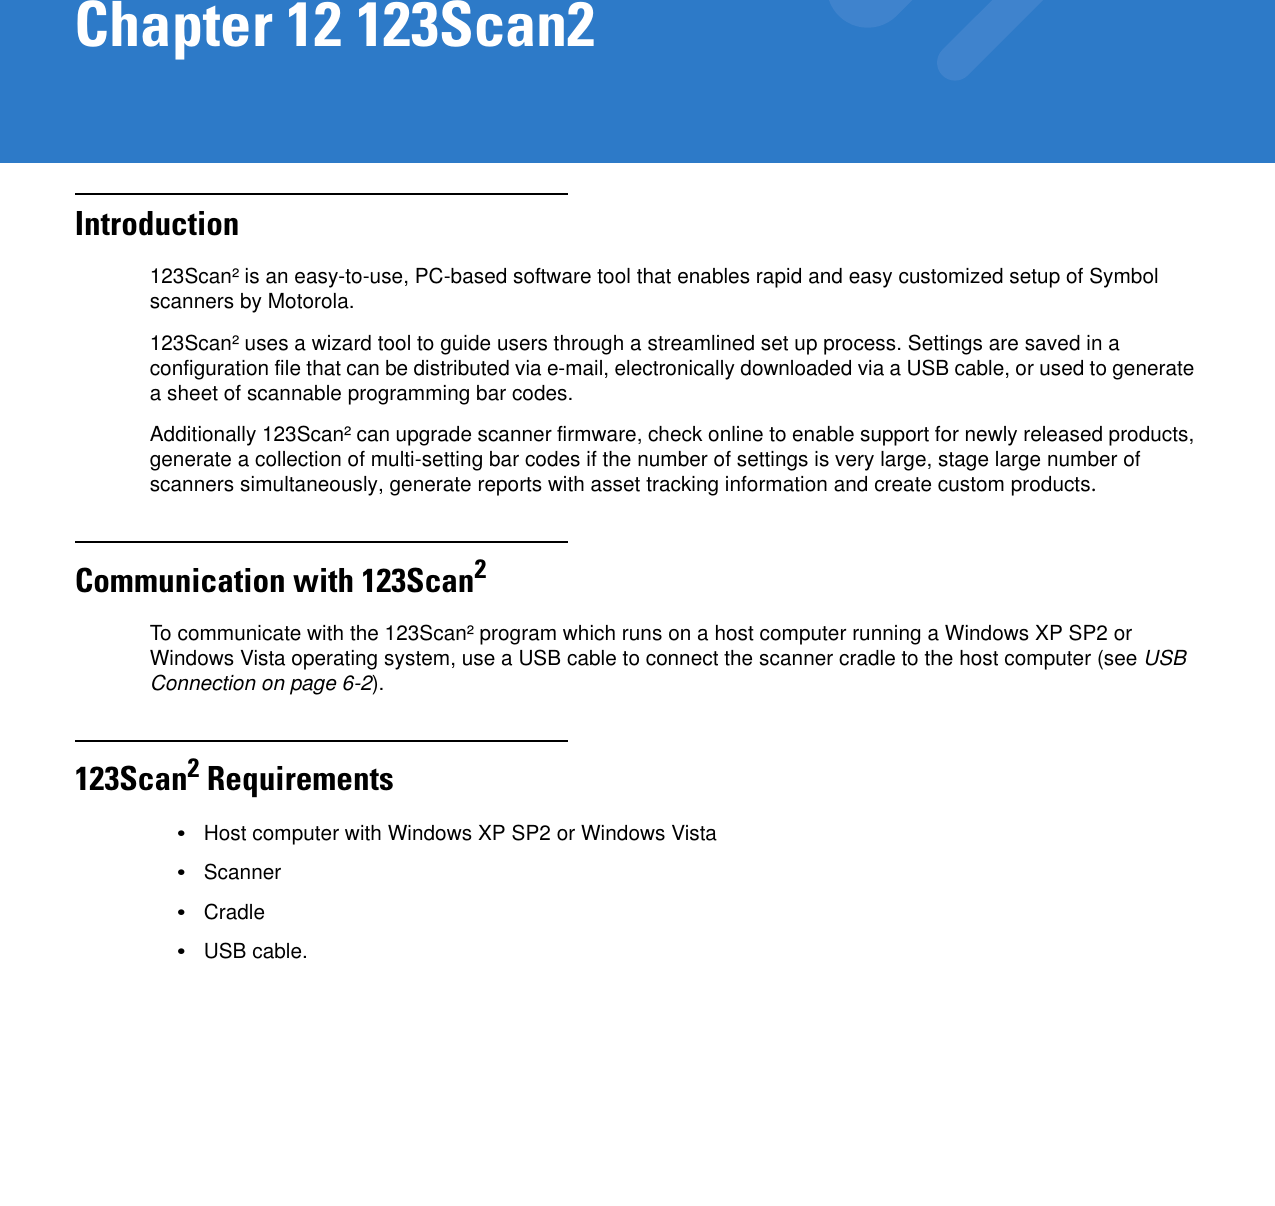 Chapter 12 123Scan2Introduction123Scan² is an easy-to-use, PC-based software tool that enables rapid and easy customized setup of Symbol scanners by Motorola.123Scan² uses a wizard tool to guide users through a streamlined set up process. Settings are saved in a configuration file that can be distributed via e-mail, electronically downloaded via a USB cable, or used to generate a sheet of scannable programming bar codes.Additionally 123Scan² can upgrade scanner firmware, check online to enable support for newly released products, generate a collection of multi-setting bar codes if the number of settings is very large, stage large number of scanners simultaneously, generate reports with asset tracking information and create custom products.Communication with 123Scan2To communicate with the 123Scan² program which runs on a host computer running a Windows XP SP2 or Windows Vista operating system, use a USB cable to connect the scanner cradle to the host computer (see USB Connection on page 6-2).123Scan2 Requirements•Host computer with Windows XP SP2 or Windows Vista•Scanner•Cradle•USB cable.